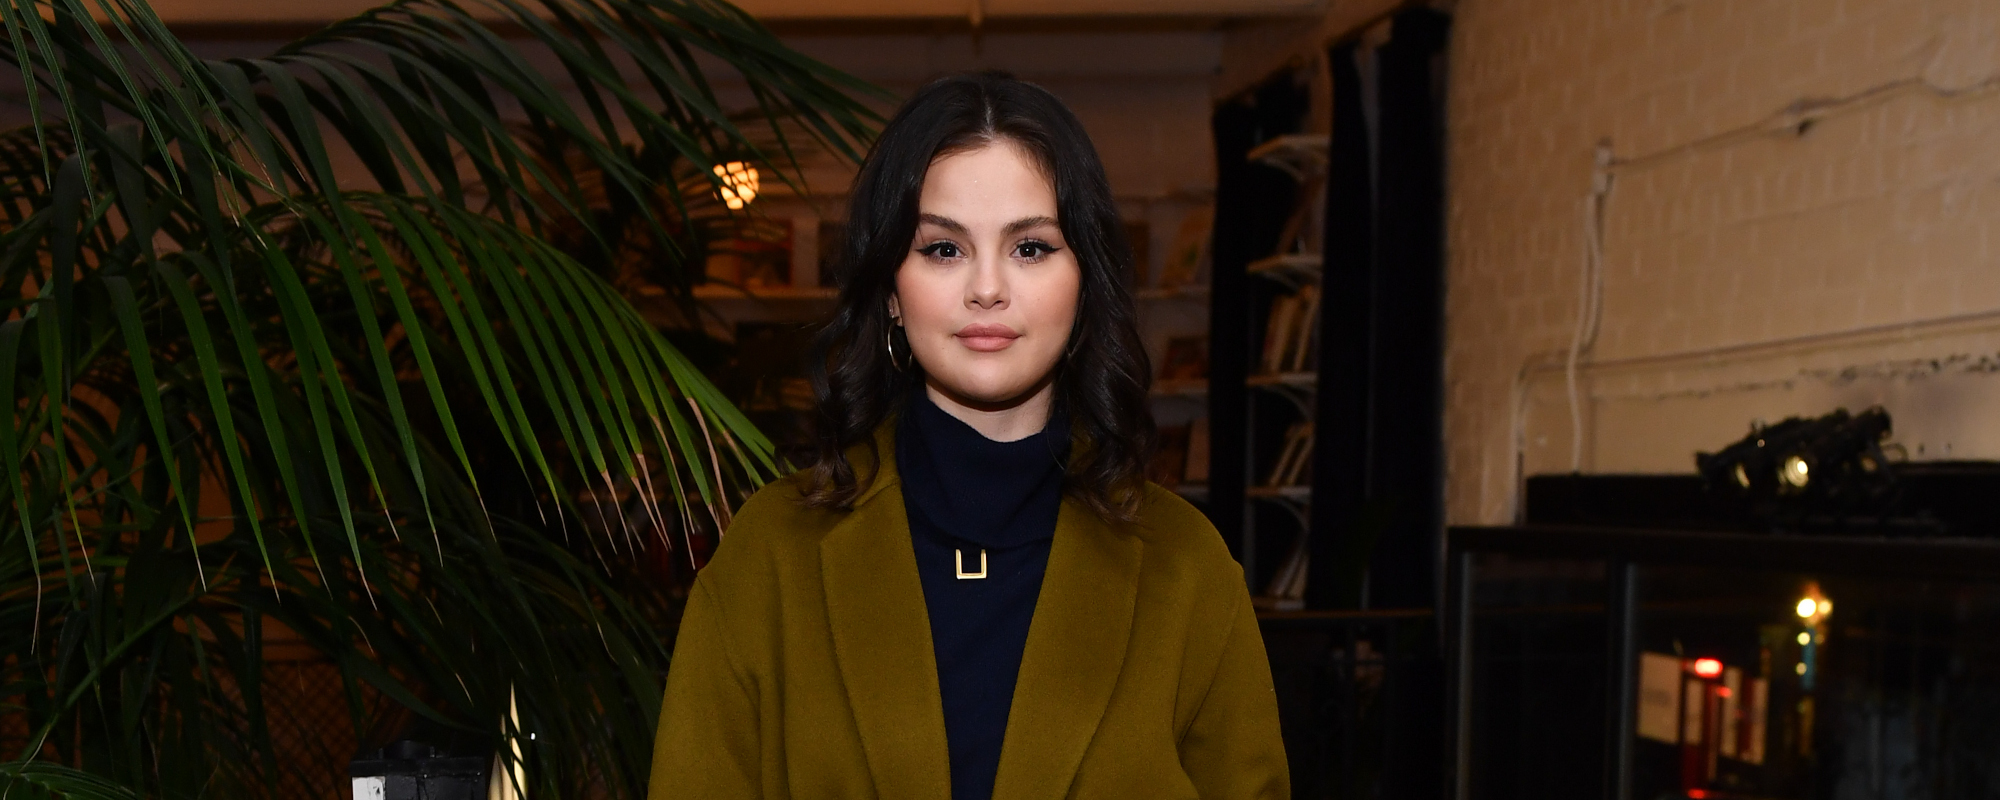 Selena Gomez to Release New Single Later This Month